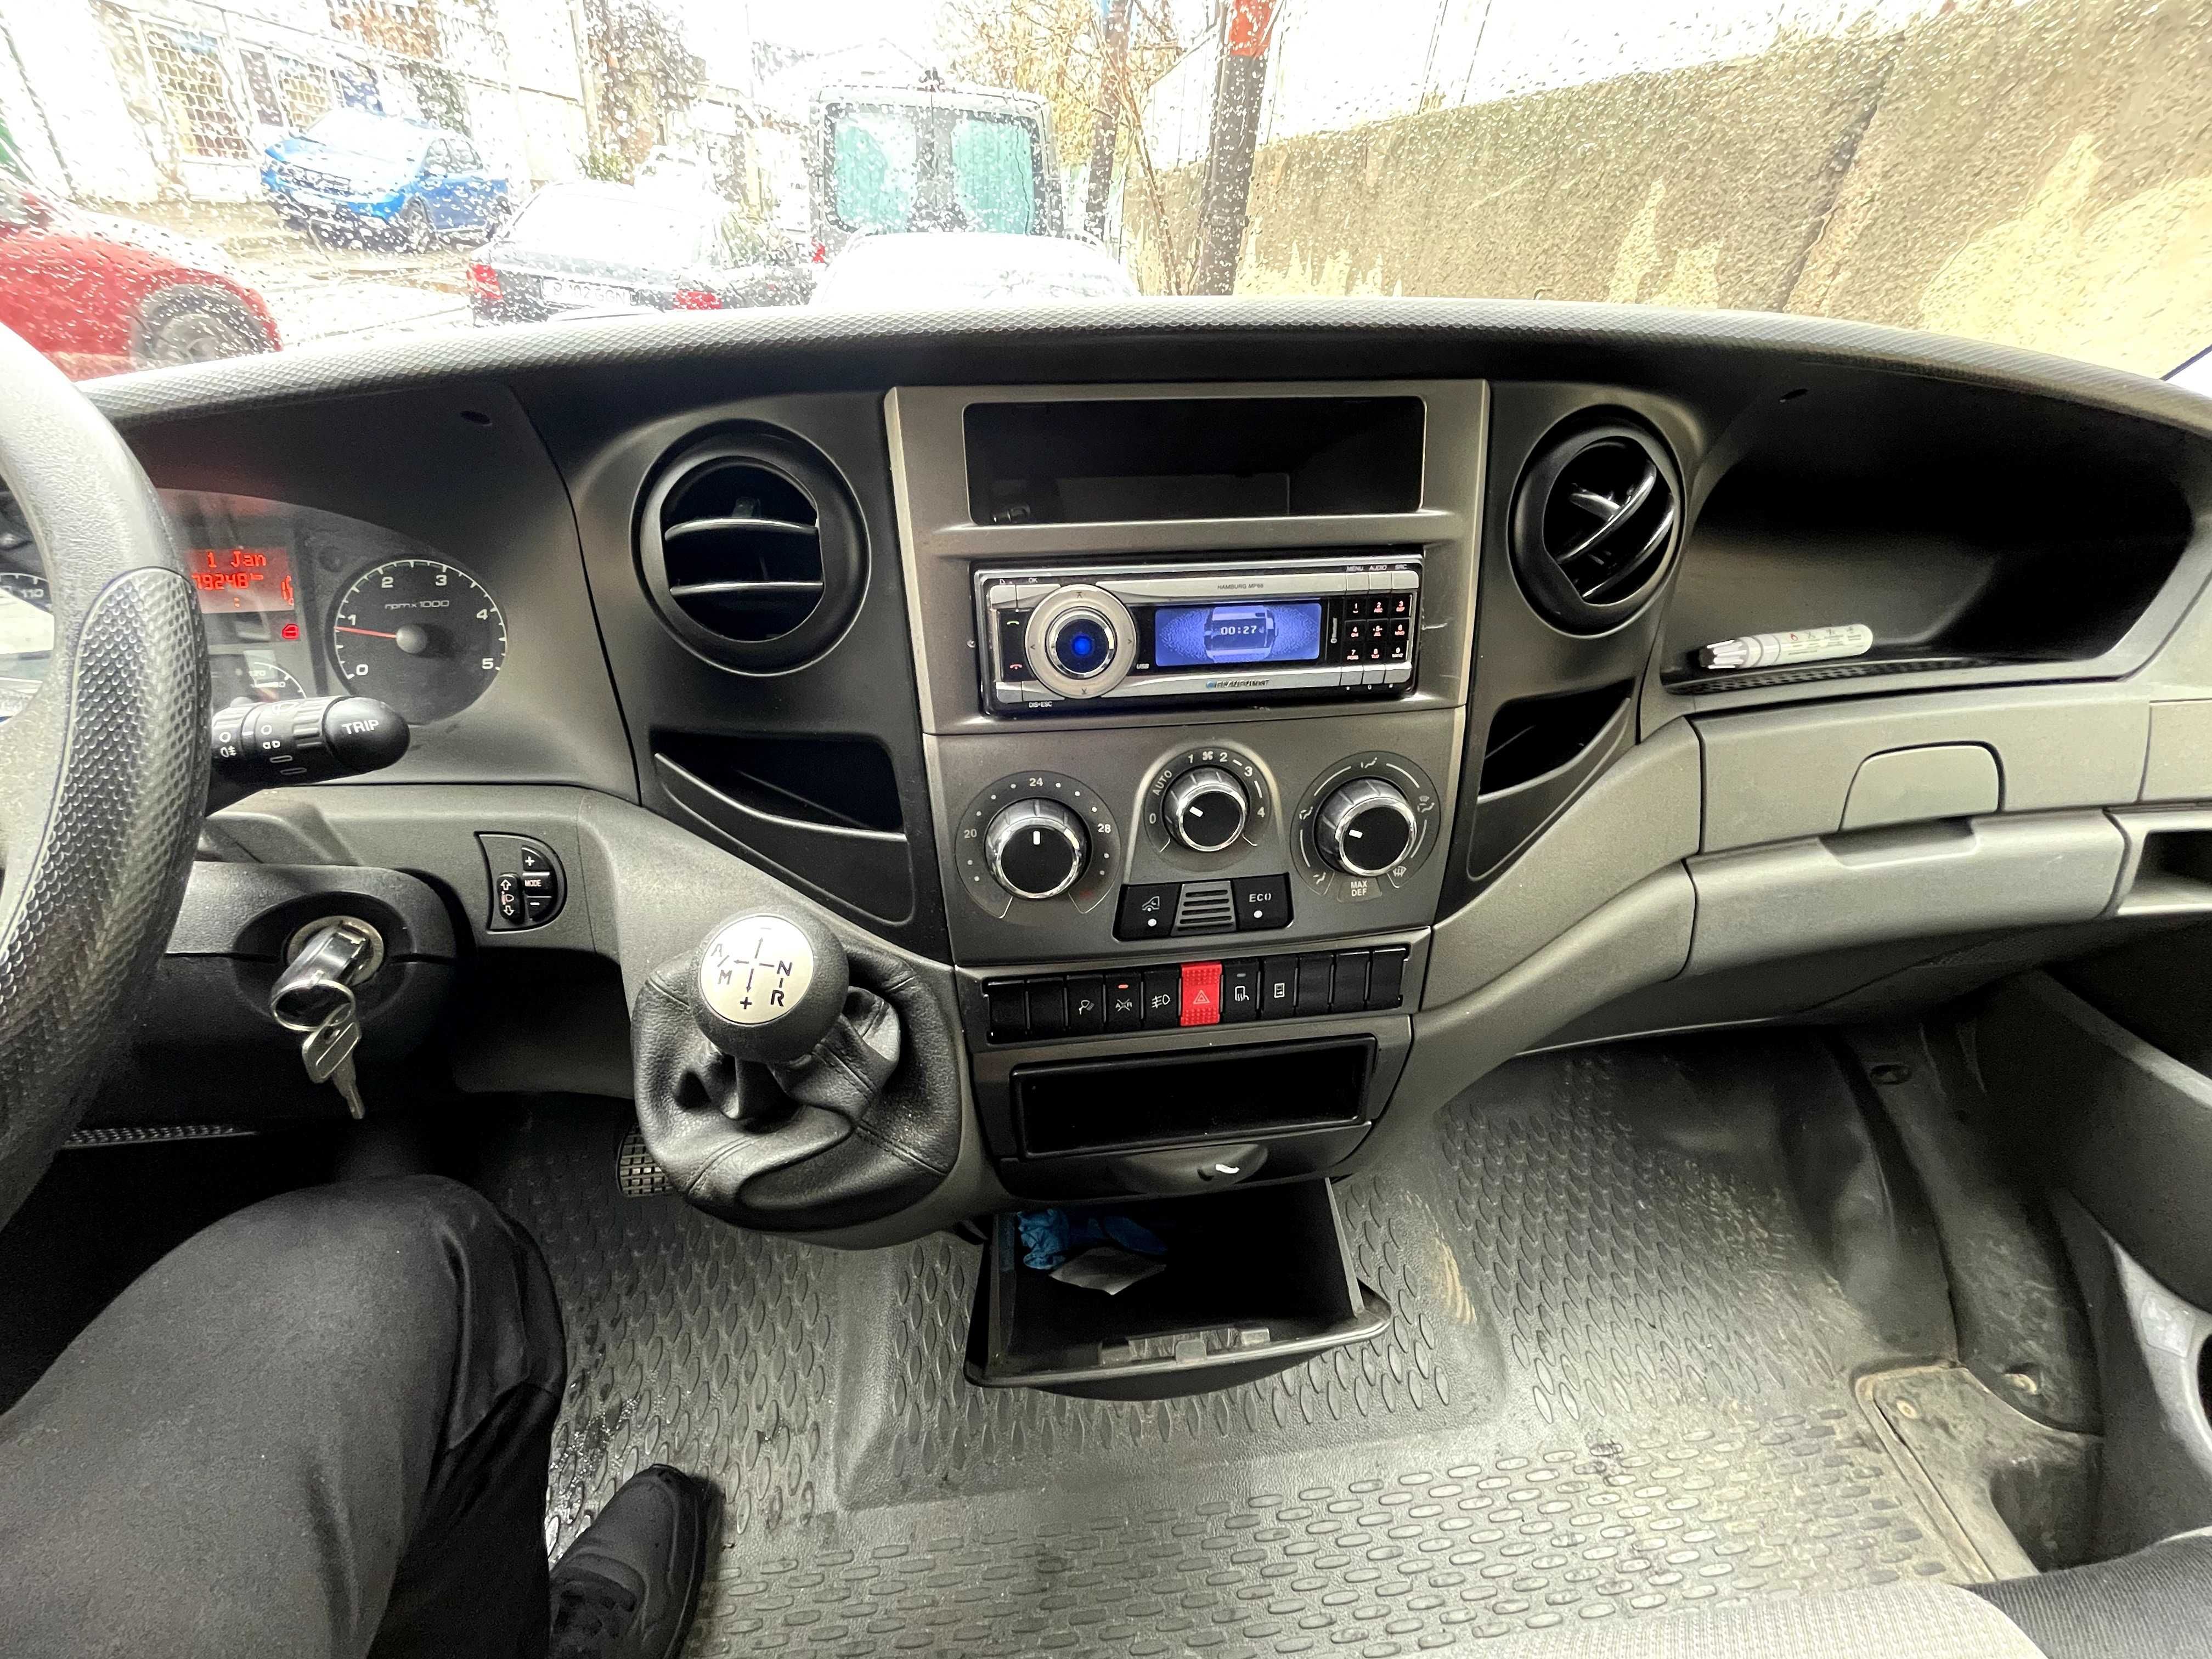 Iveco Daily IS35SC2AA echipare funerara